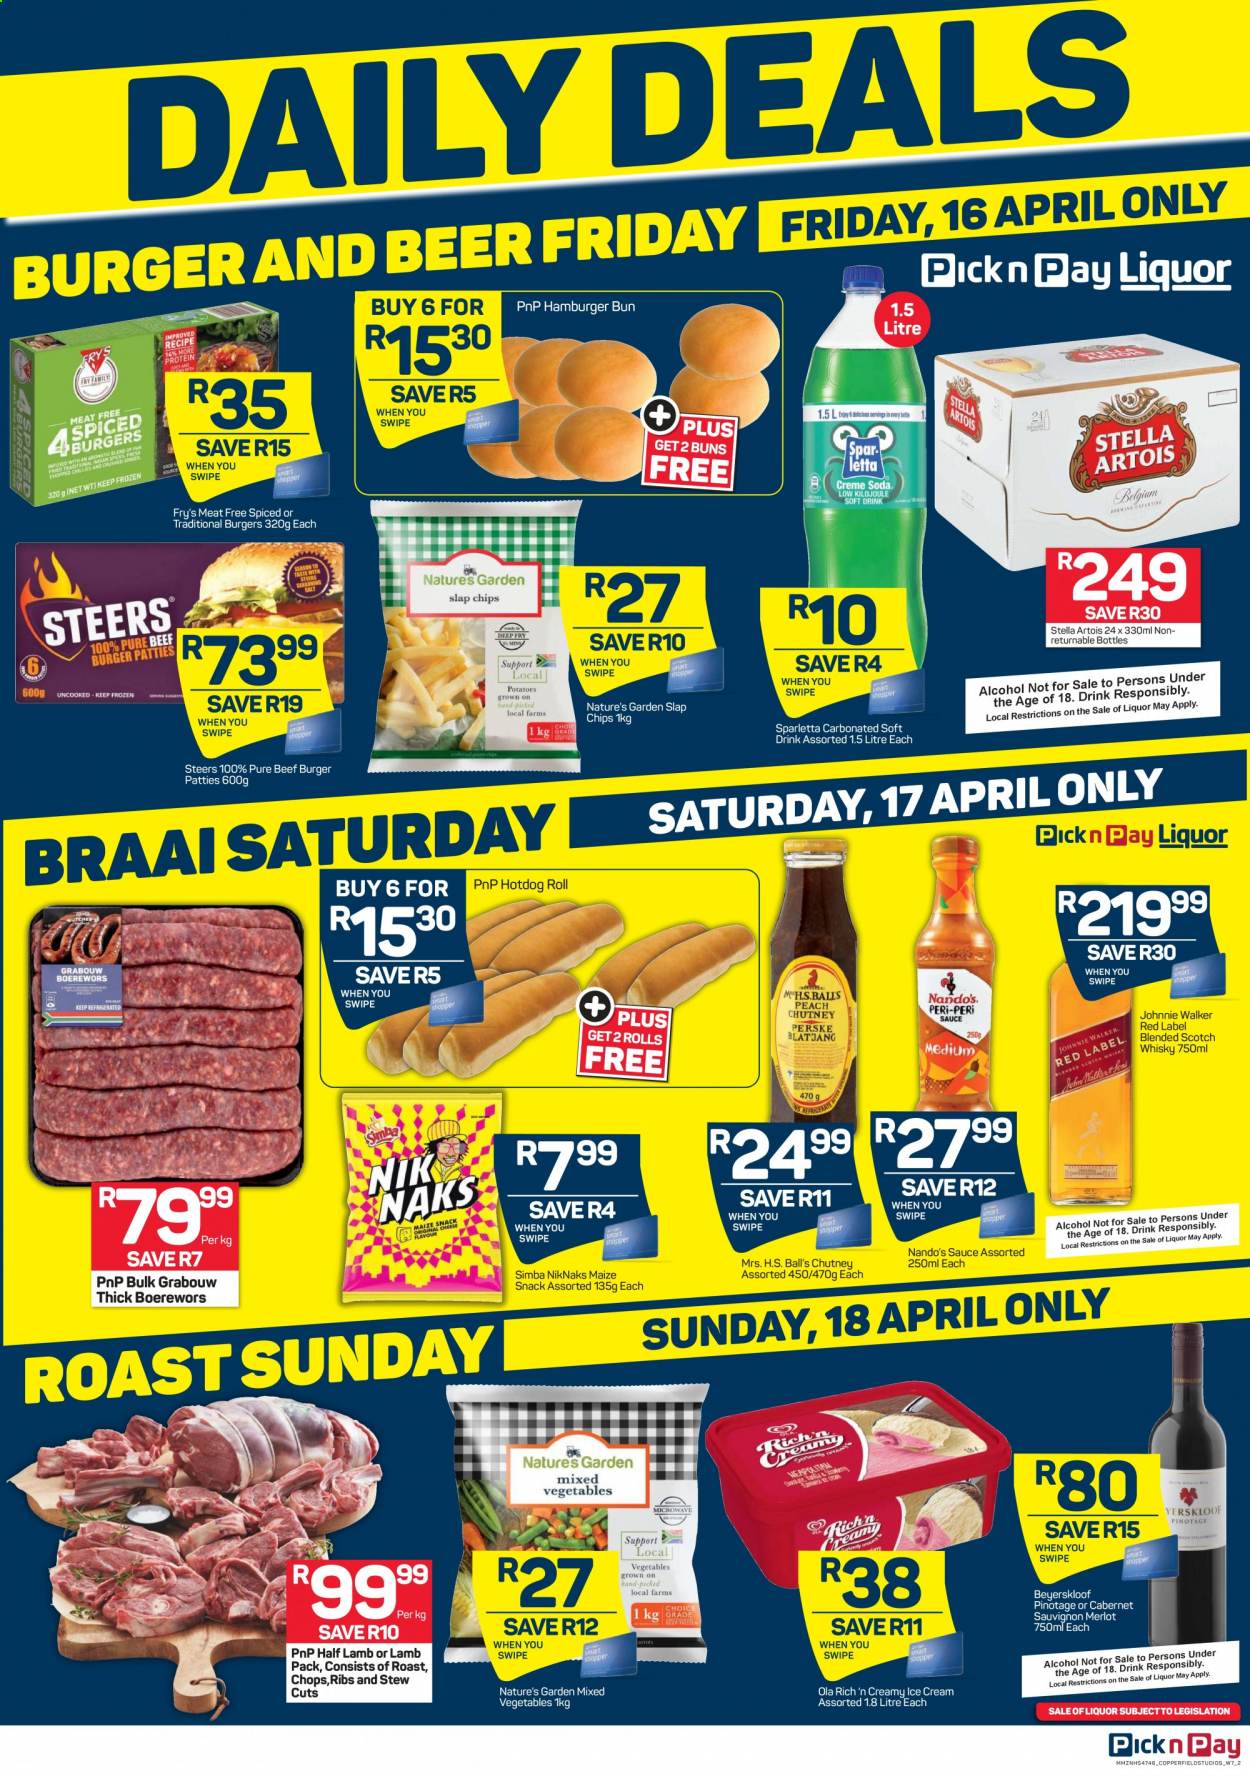 Pick n Pay specials - 04.15.2021 - 04.18.2021. 